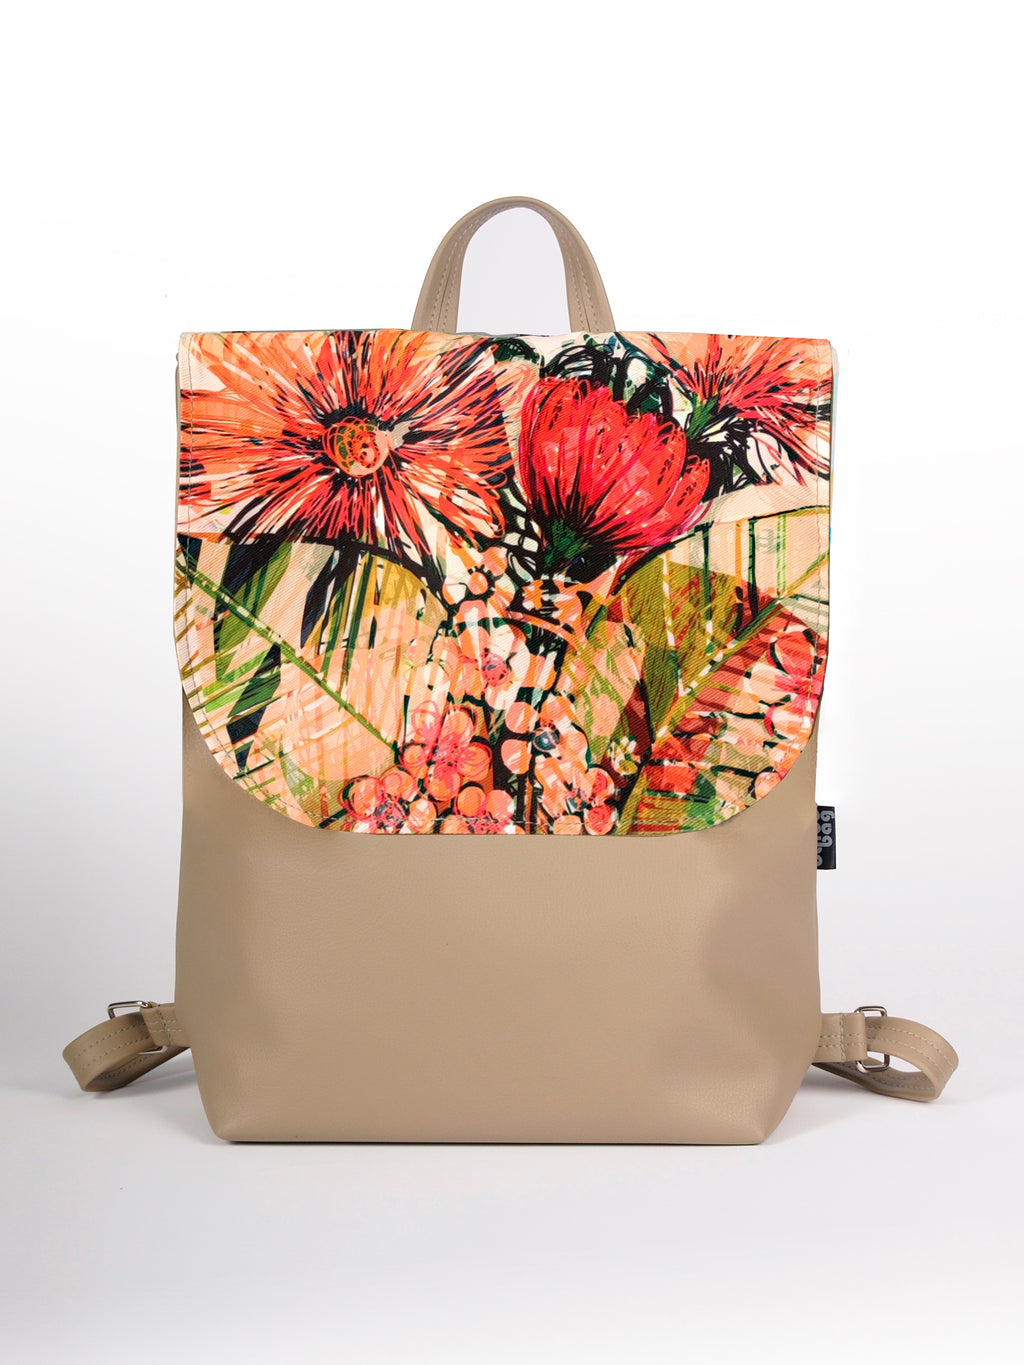 Bardo backpack large - Fragrant garden - Premium backpack large from BARDO ART WORKS - Just lvbackpack, beige, brown, gift, handemade, natural, nature, painted patterns, spring, tablet, urban style, vegan leather, woman89.00! Shop now at BARDO ART WORKS